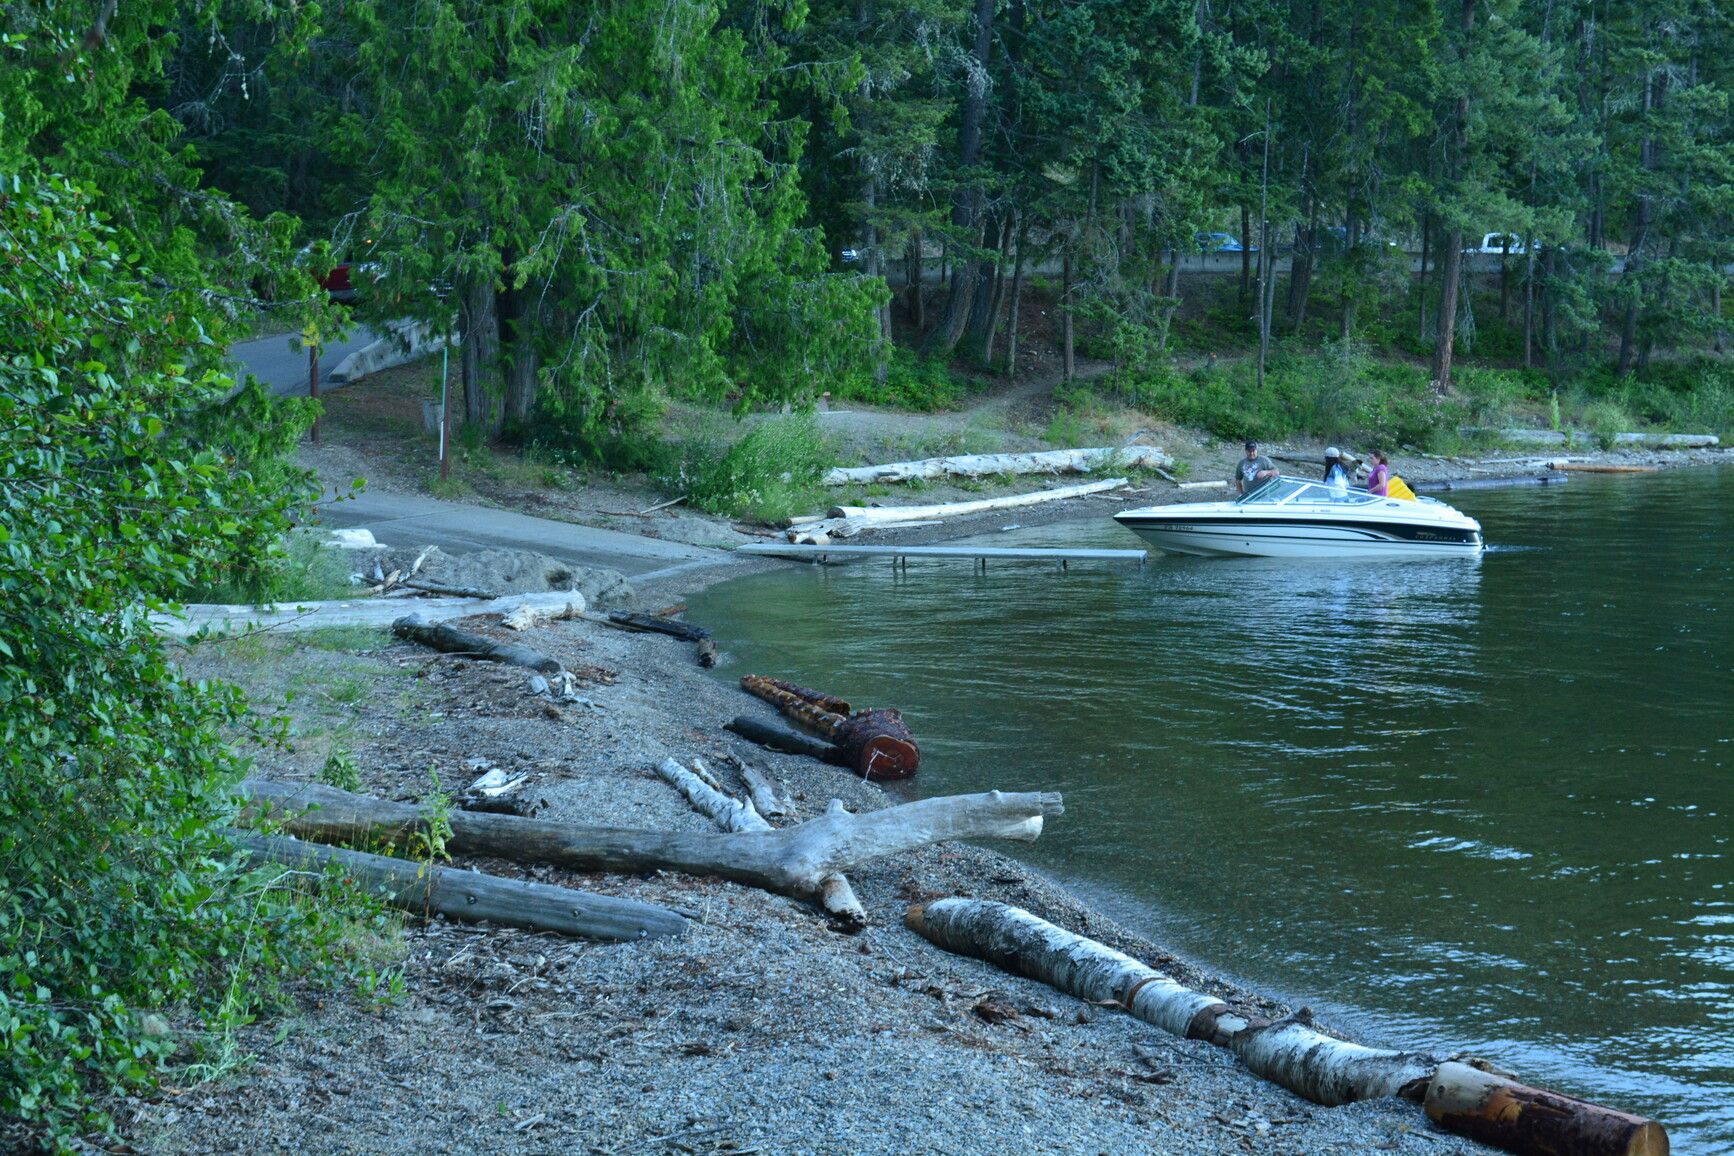 Herald Park offers a wide boat launch on Shuswap Lake.